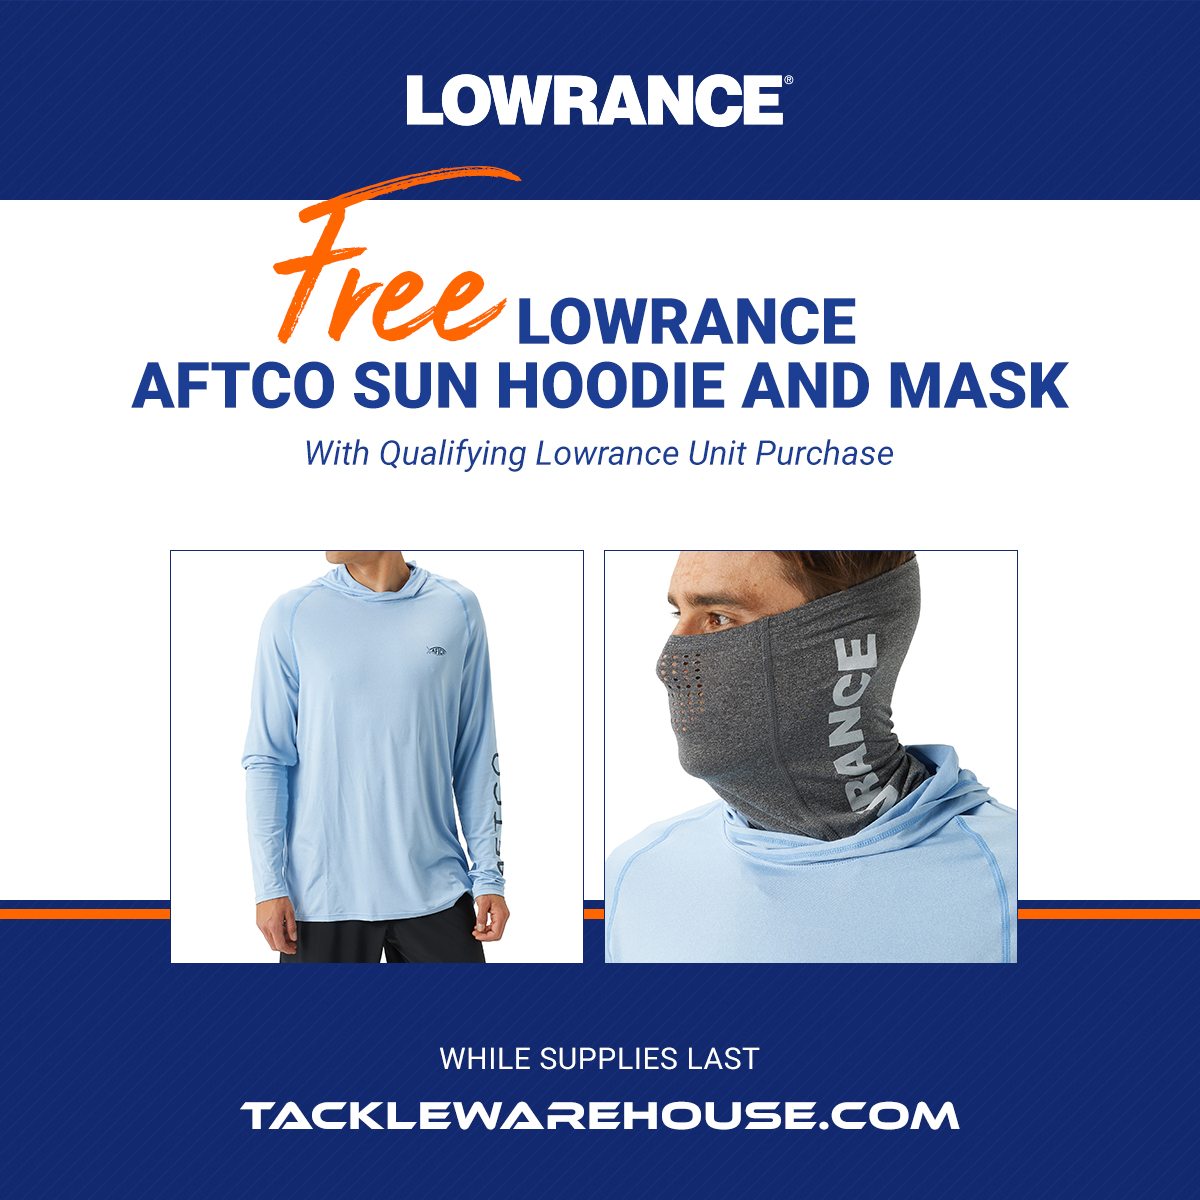 FREE Aftco Sun Hoodie & Mask With Qualify Lowrance Purchase